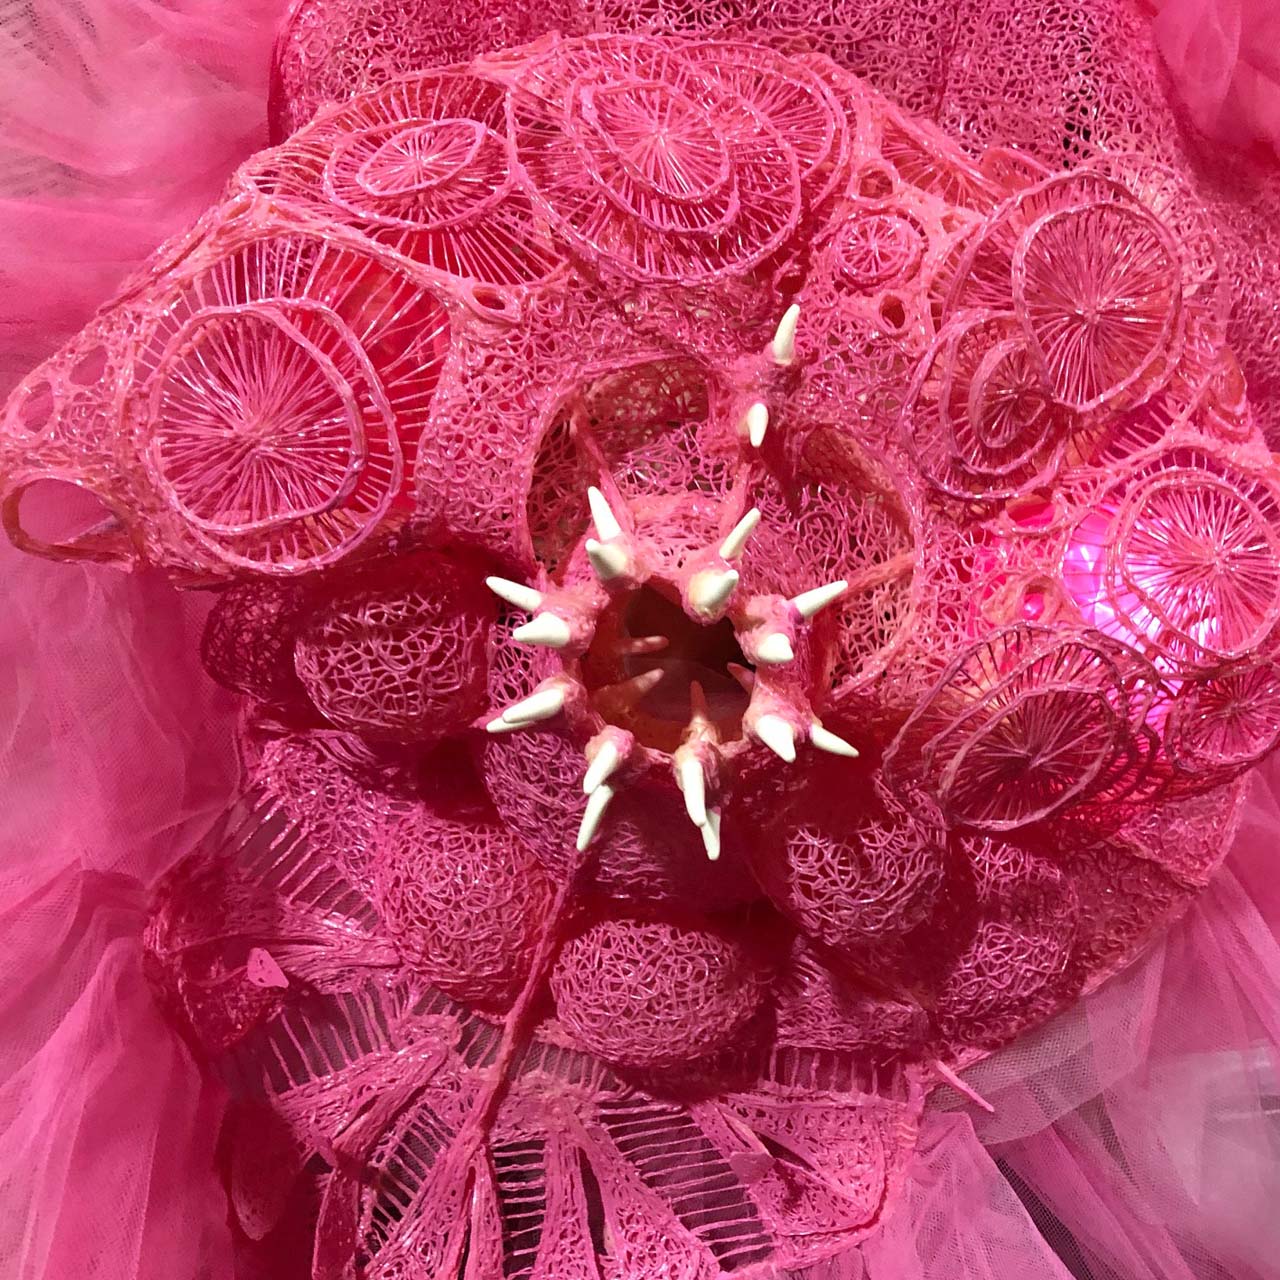 CORAL CLUSTER, World of WearableArt 2018